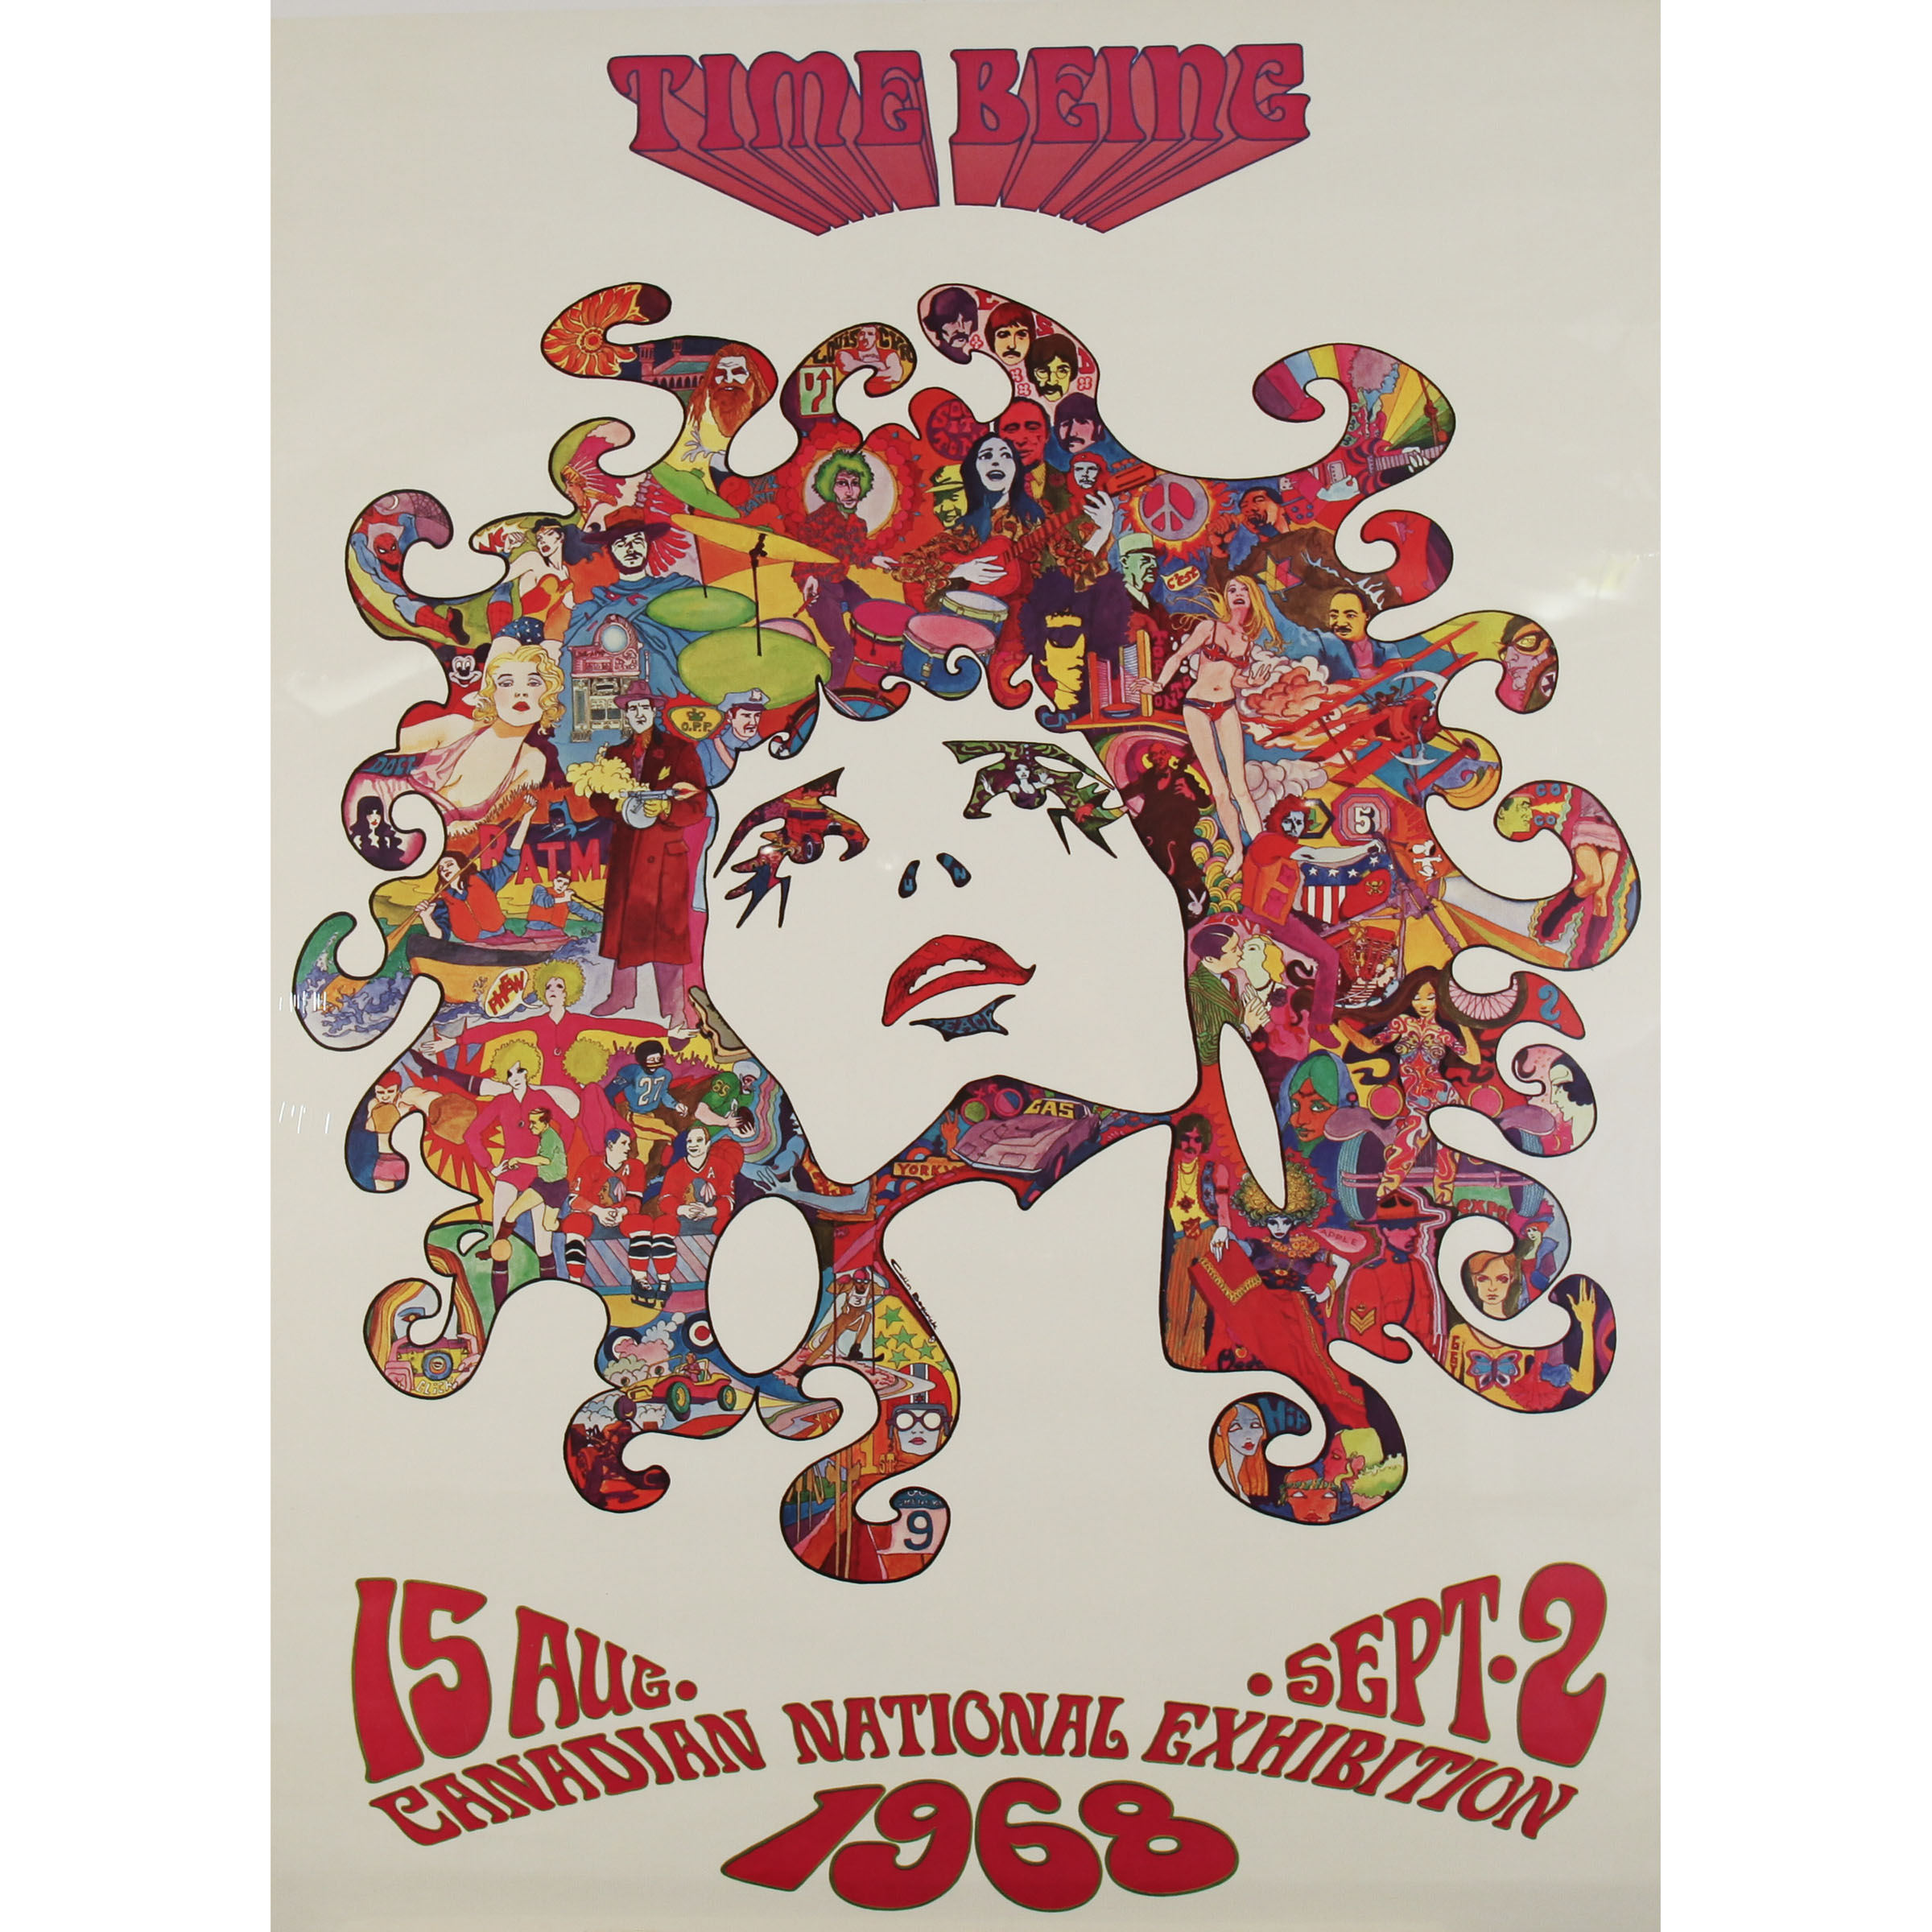 Canadian National Exhibiton Poster, ‘Time Being’, 15 Aug. - Sept. 2, 1968